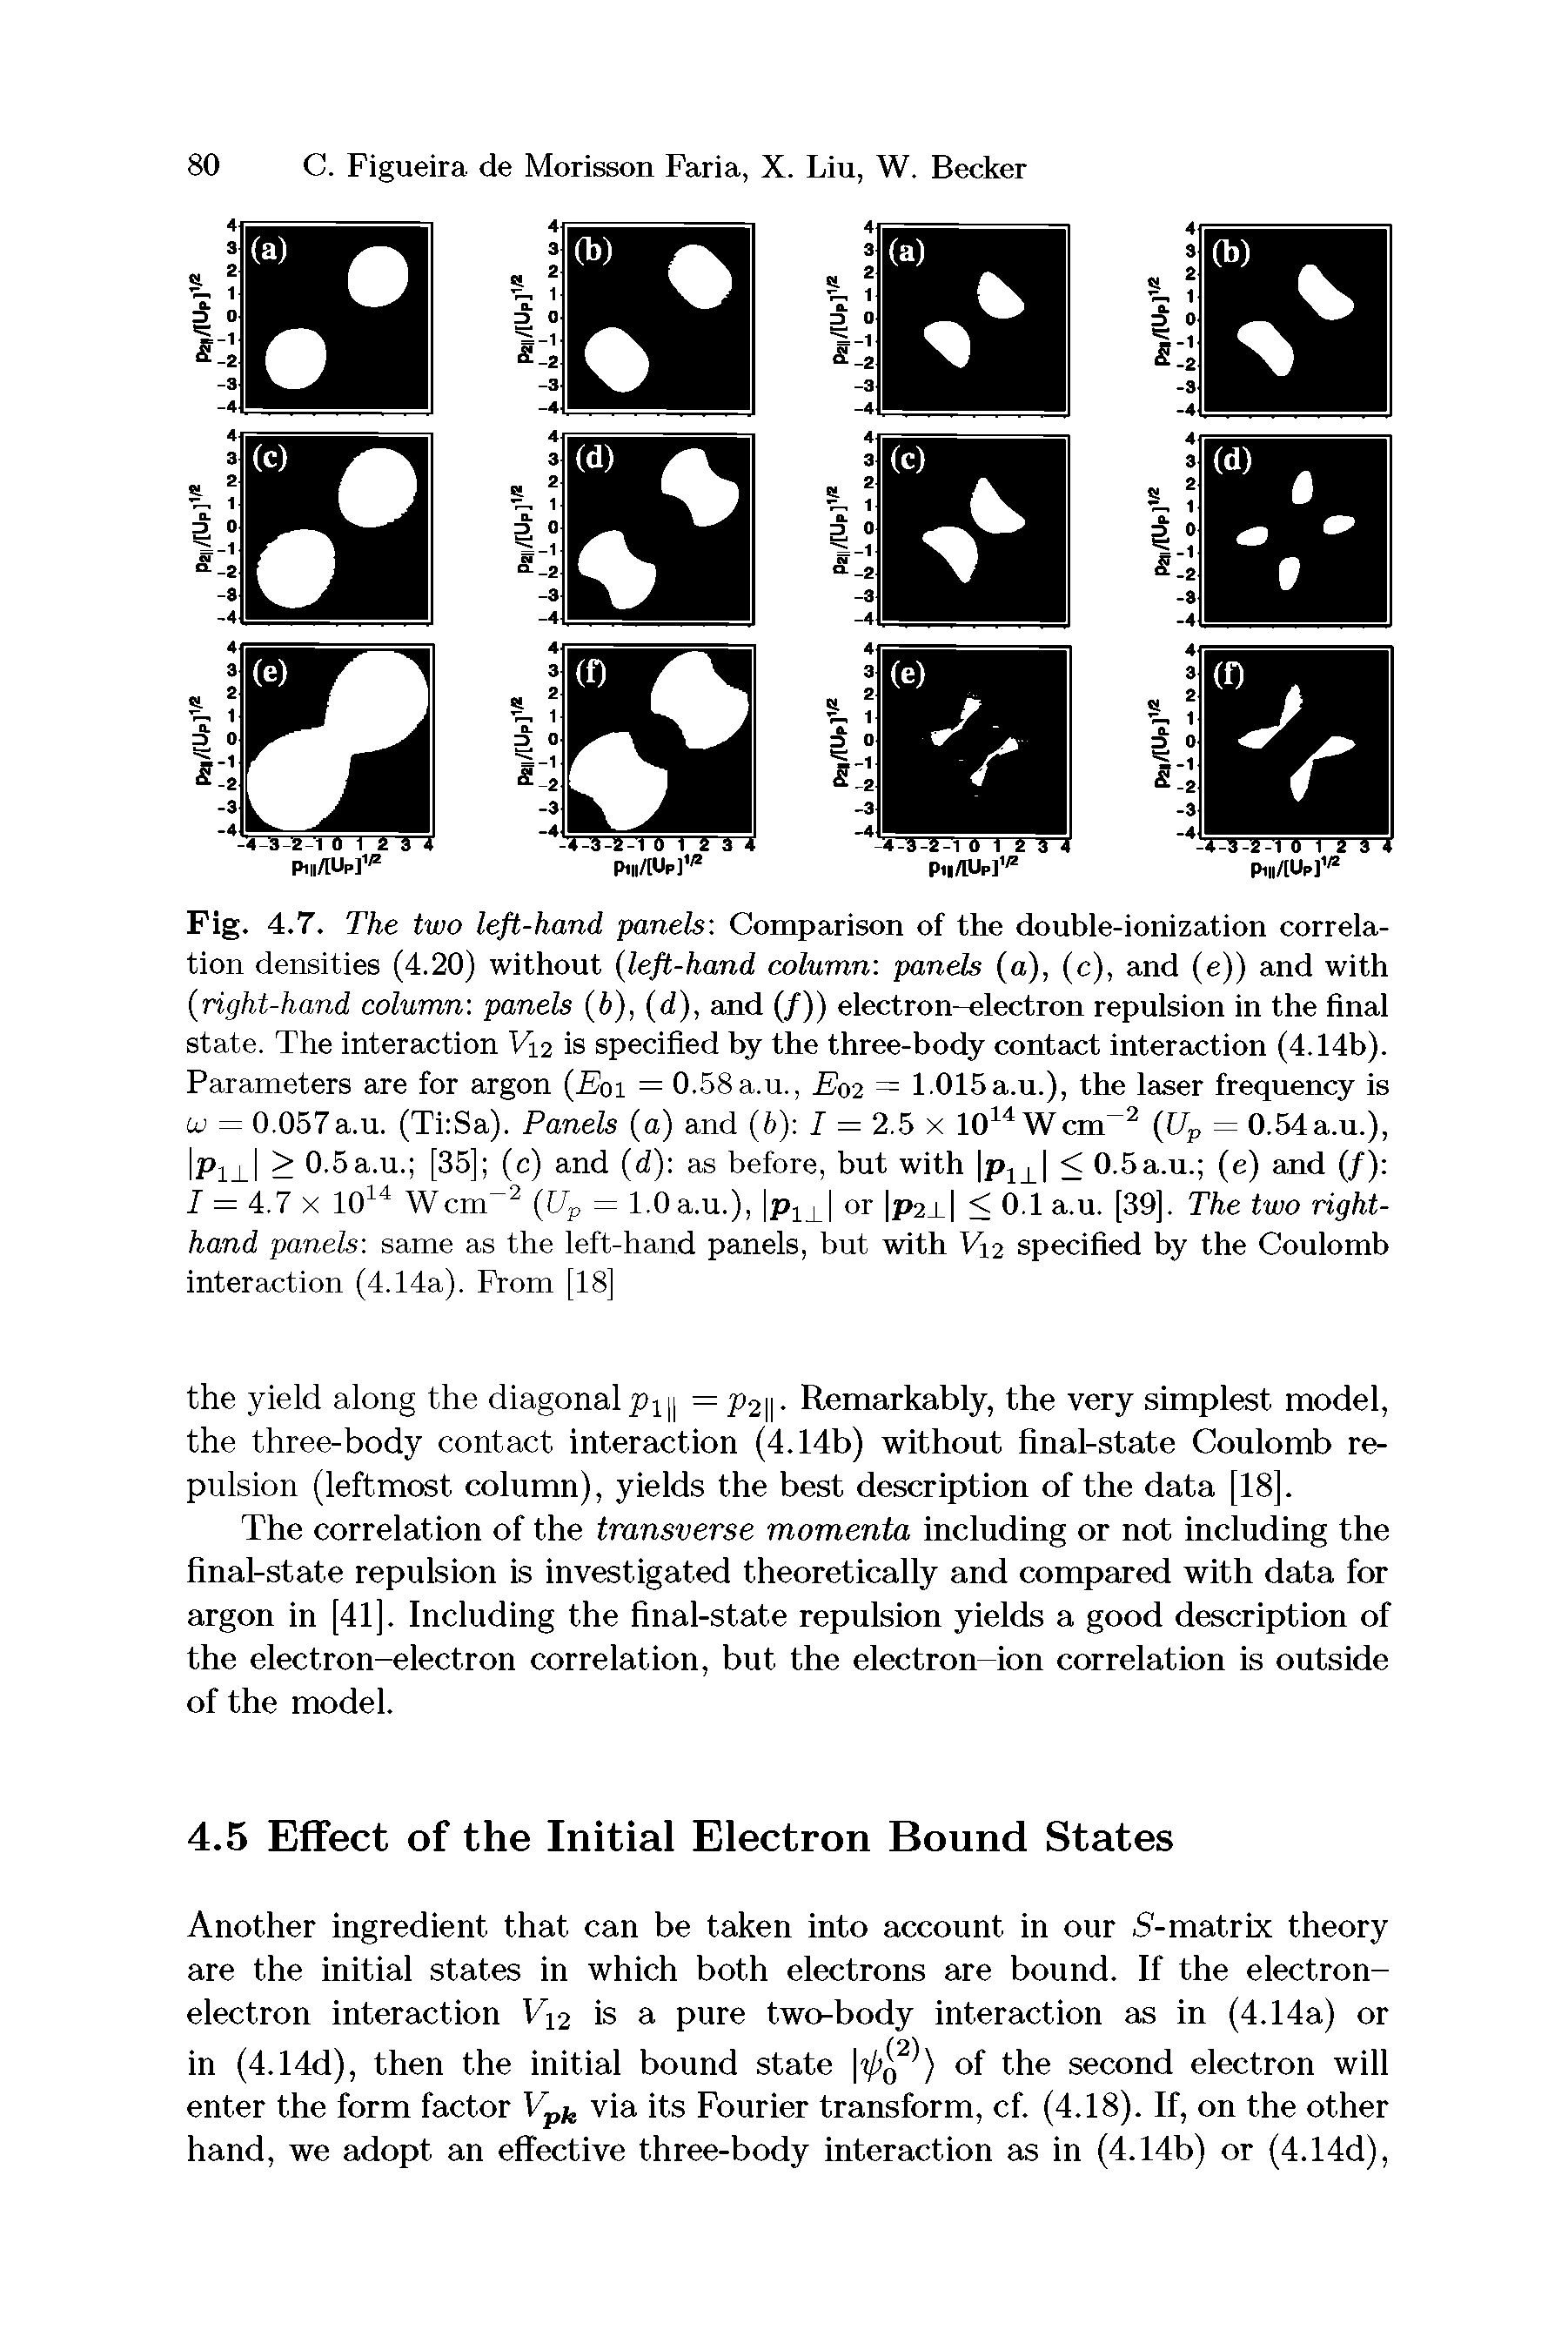 Fig. 4.7. The two left-hand panels Comparison of the double-ionization correlation densities (4.20) without (left-hand column panels (a), (c), and (e)) and with (right-hand column panels (b), (d), and (/)) electron-electron repulsion in the final state. The interaction Vi2 is specified by the three-body contact interaction (4.14b). Parameters are for argon ( 01 = 0.58a.u., E02 = 1.015a.u.), the laser frequency is u = 0.057a.u. (Ti Sa). Panels (a) and (b) I = 2.5 x 1014Wcm 2 (Up = 0.54a.u.), Pij > 0.5a.u. [35] (c) and (d) as before, but with pXJJ < 0.5a.u. (e) and (/) I = 4.7 x 1014 Wcm 2 (Up = 1.0 a.u.), p1 or p2 < 0.1 a.u. [39]. The two right-hand panels same as the left-hand panels, but with V 2 specified by the Coulomb interaction (4.14a). From [18]...